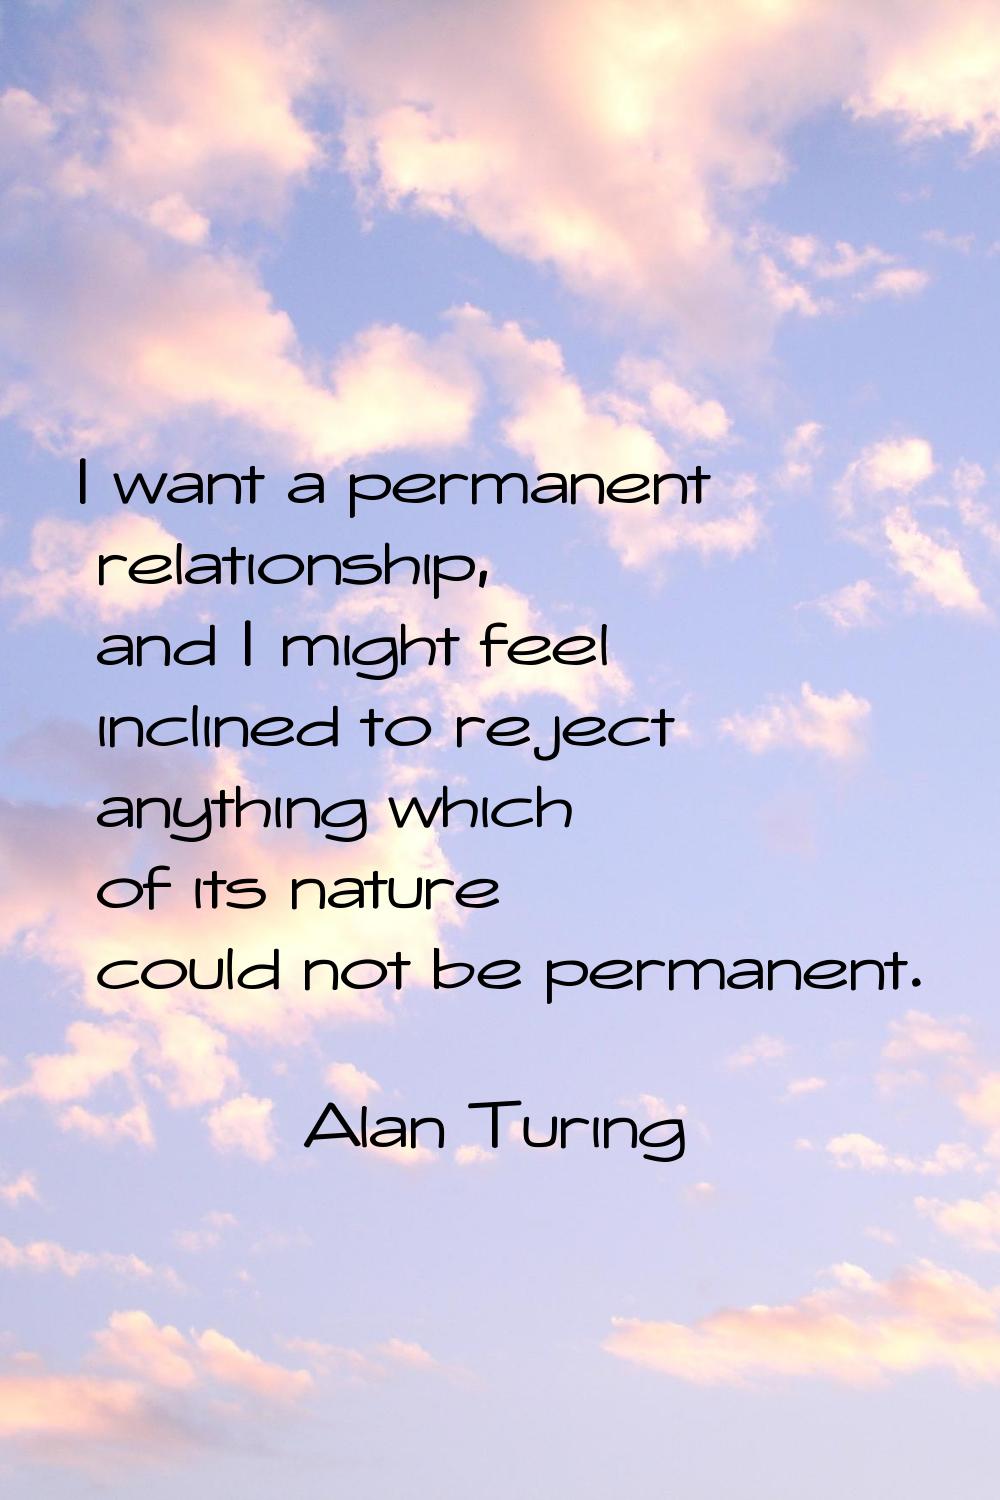 I want a permanent relationship, and I might feel inclined to reject anything which of its nature c